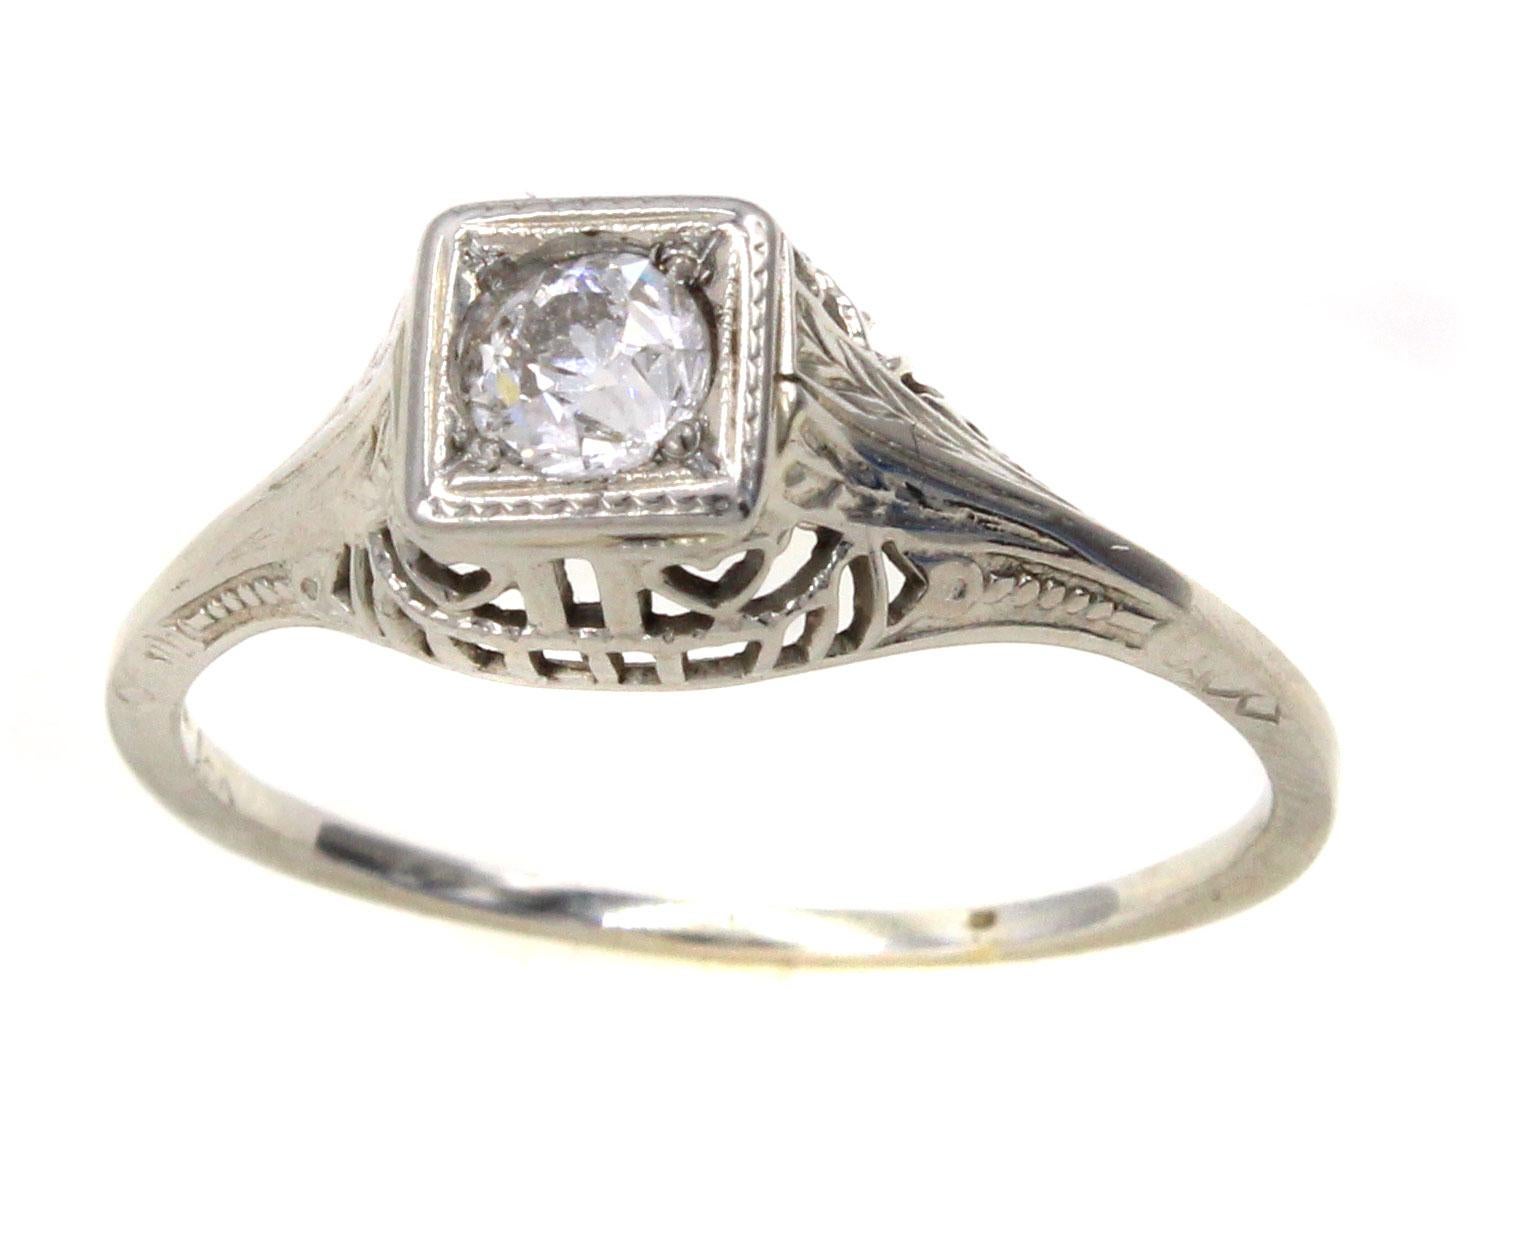 This well handcrafted Art Deco 18 Karat white gold engagement ring is centrally set with a bright white Old European cut diamond measured to weigh approximately 0.30 carats. The gallery is has beautiful a-jour work and fine hand engraving. A